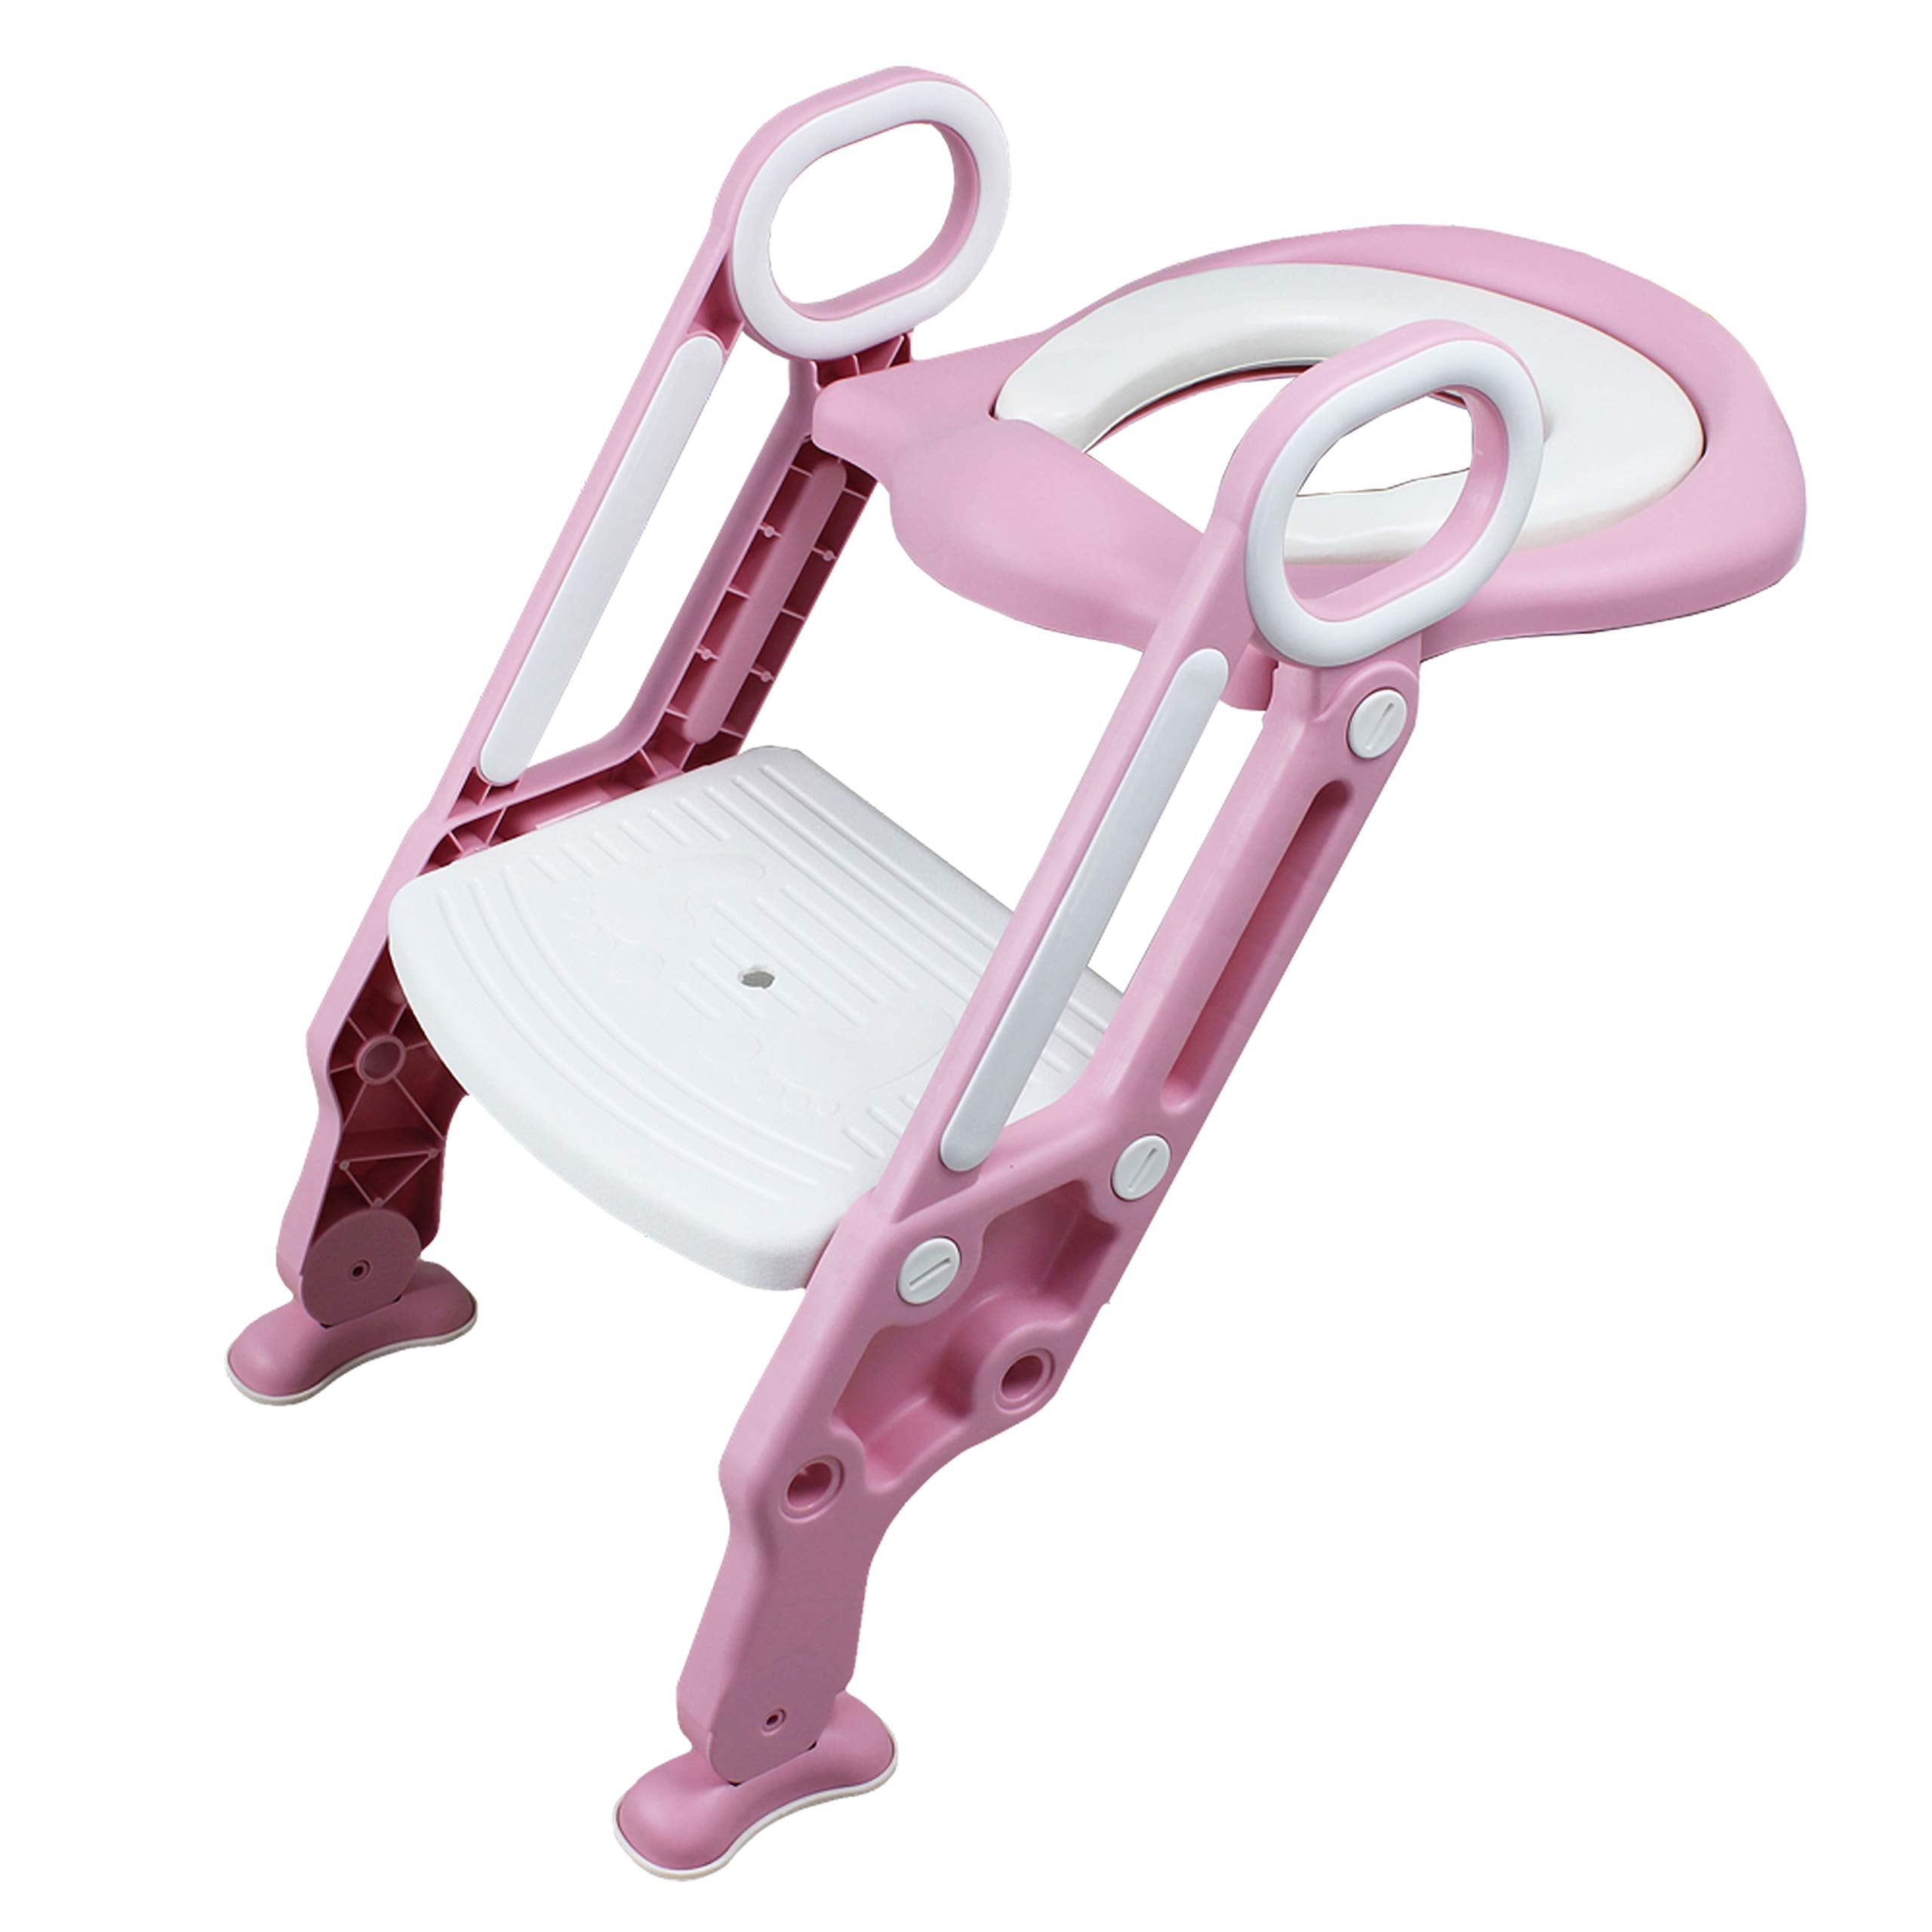 Straame Kids Toilet Ladder Seat | Adjustable Height Step-Stool for Boys and Girls | Bathroom Aid Toddler Training Seats Portable Design (Pink-White)